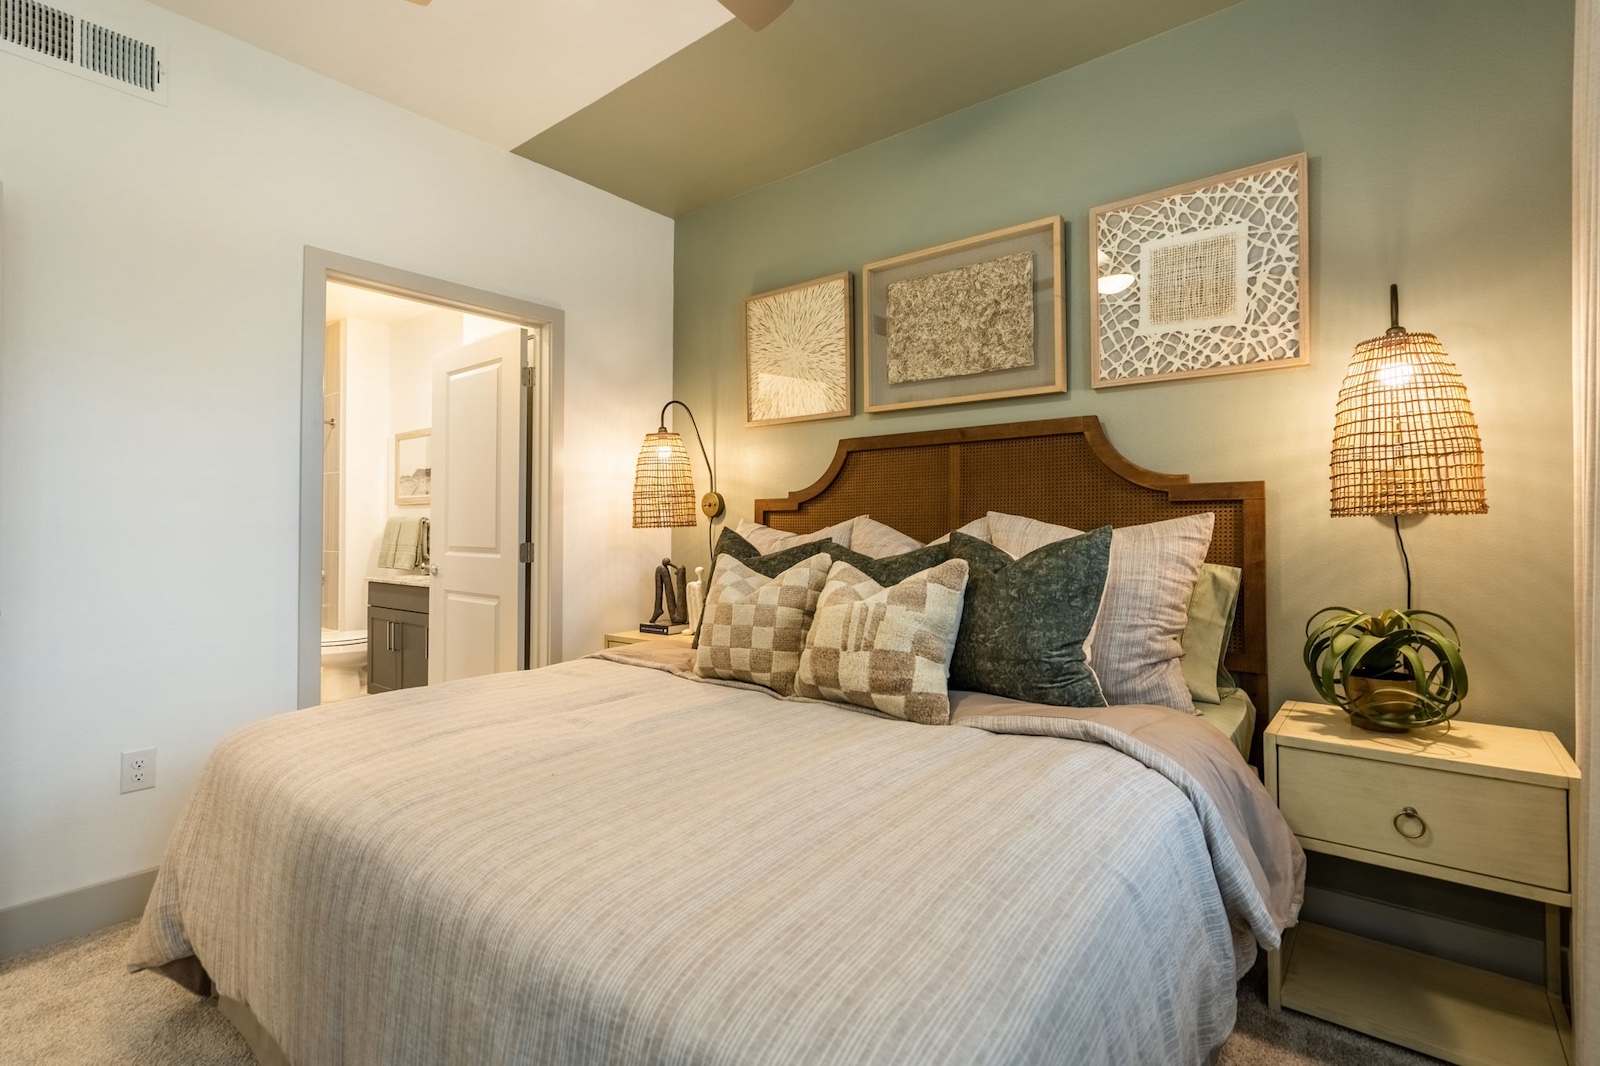 Spacious bedroom at our luxury apartments in Cypress.